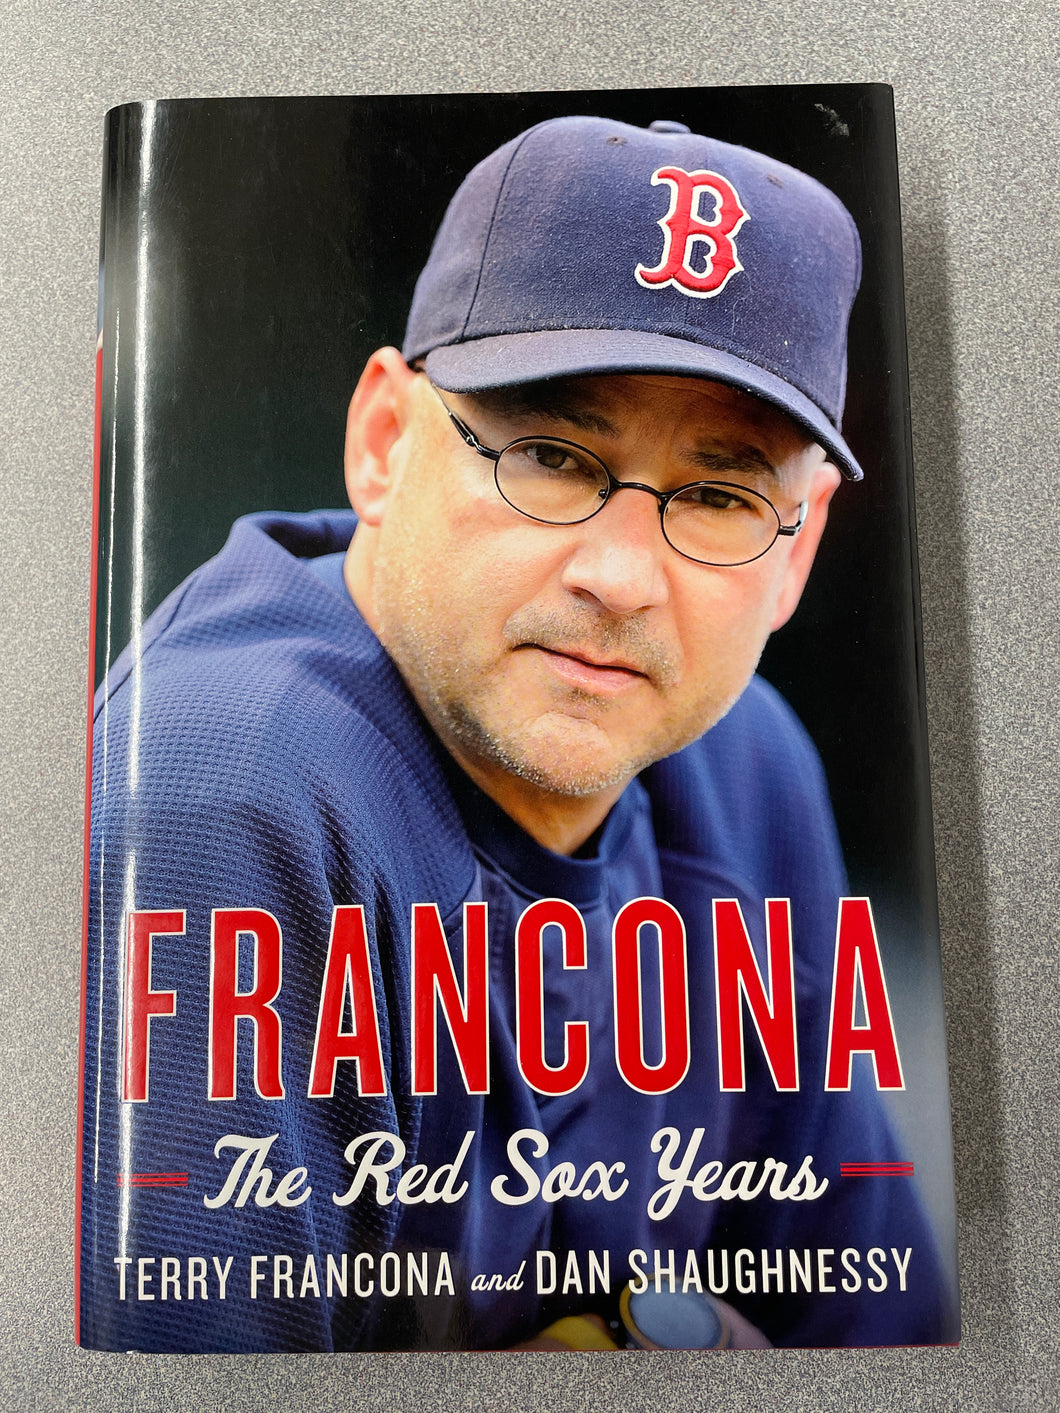 Francona: The Red Sox Years, Francona, Terry and Dan Shaughnessy [2013] BI 11/23